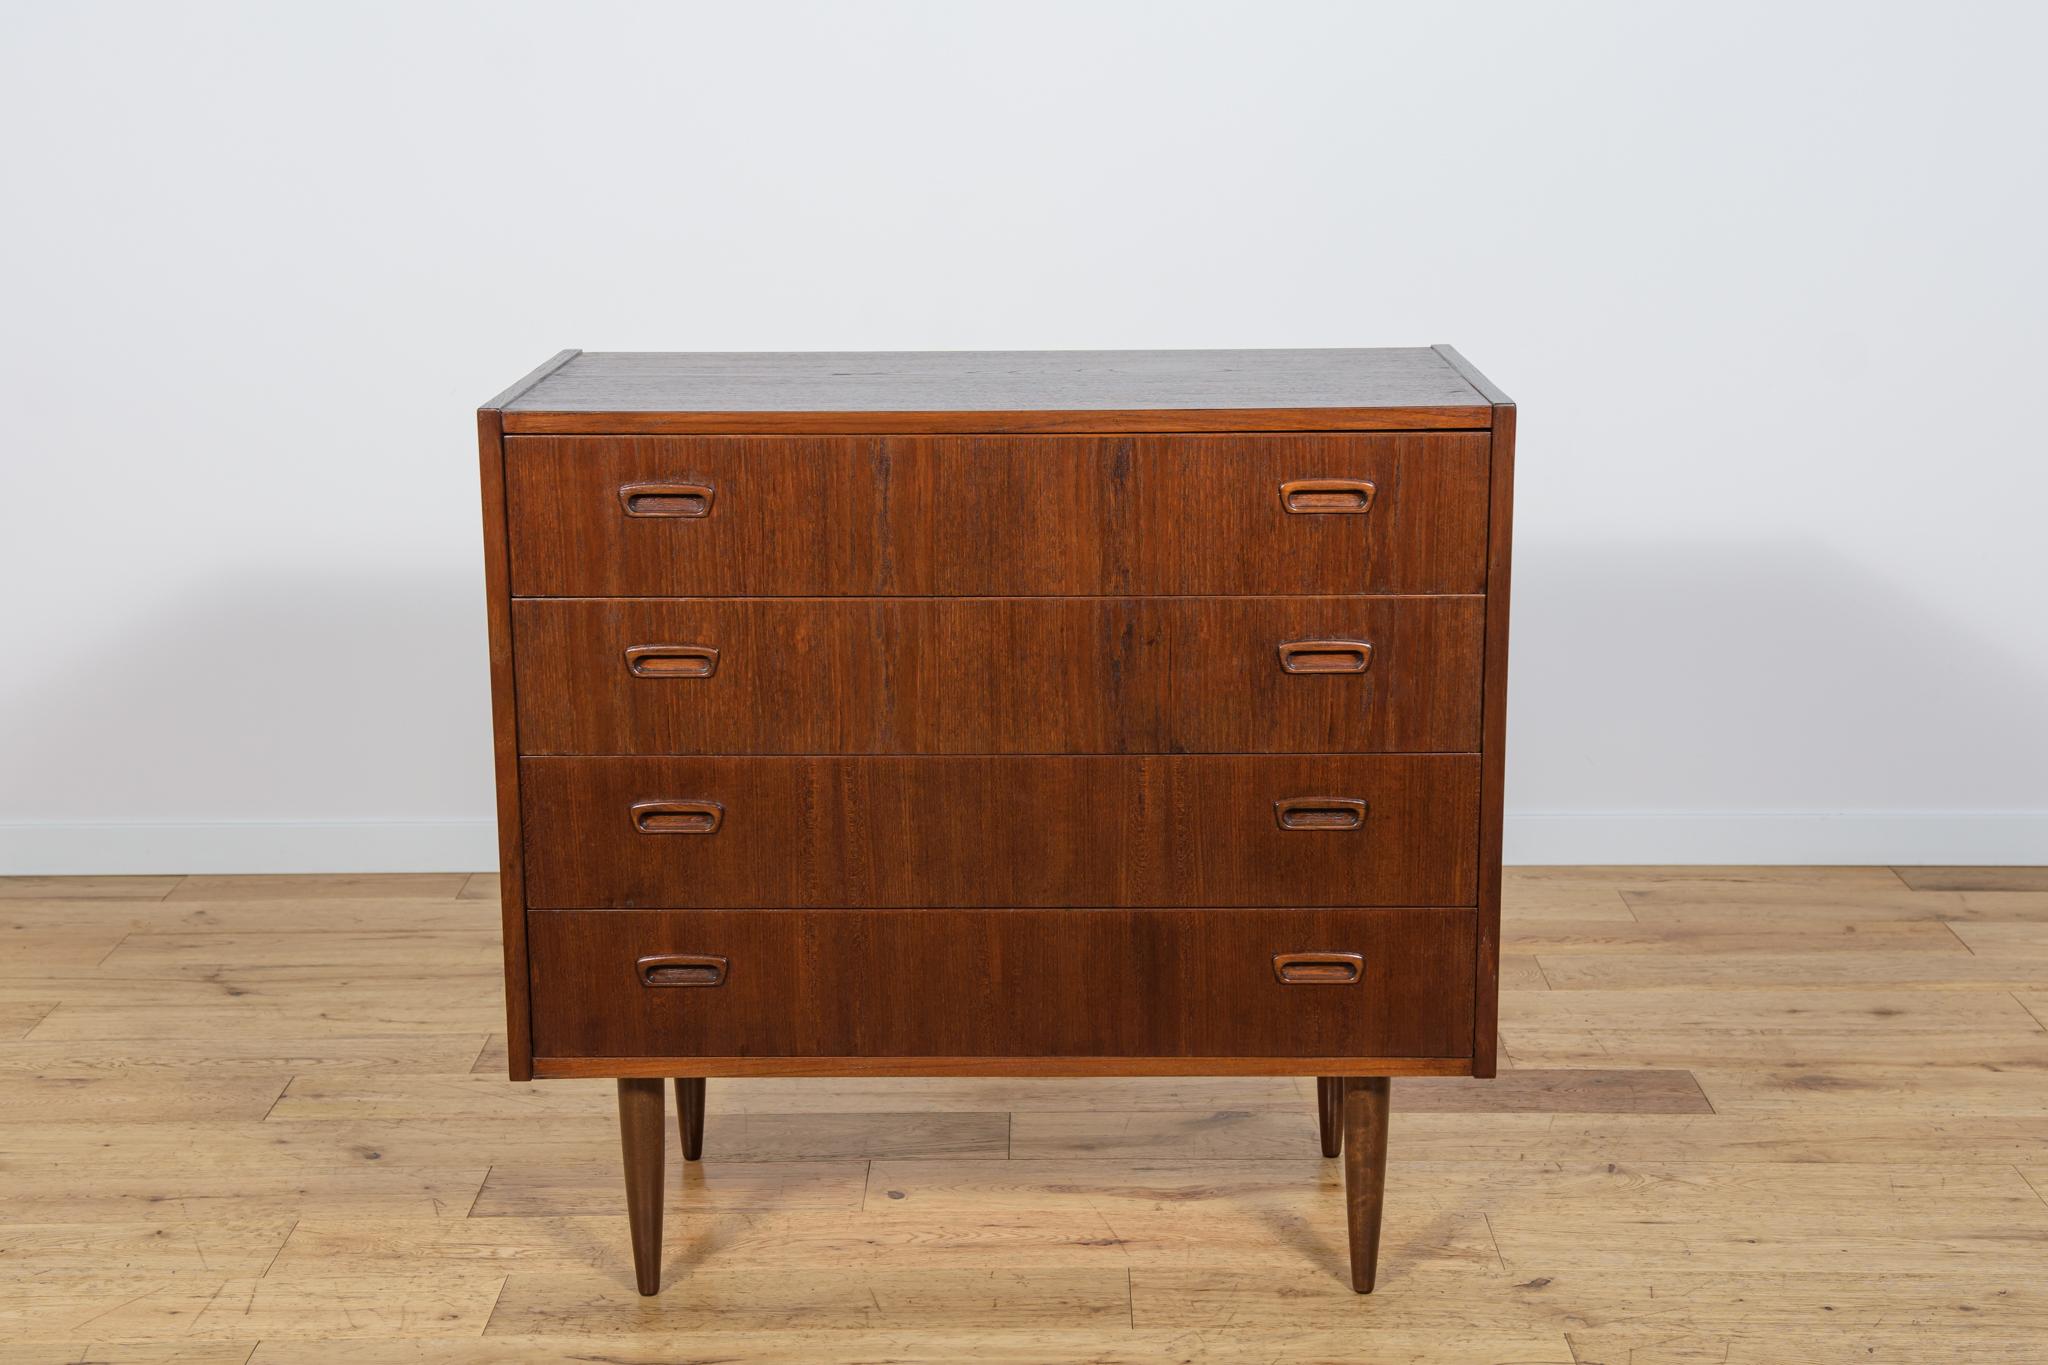 Mid-Century teak dresser made and manufactured during the 1960s in the Denmark. The dresser has profiled handles. The dresser consists of 4 drawers with profiled handles. Teak wood items cleaned from the old surface, painted rosewood stain and